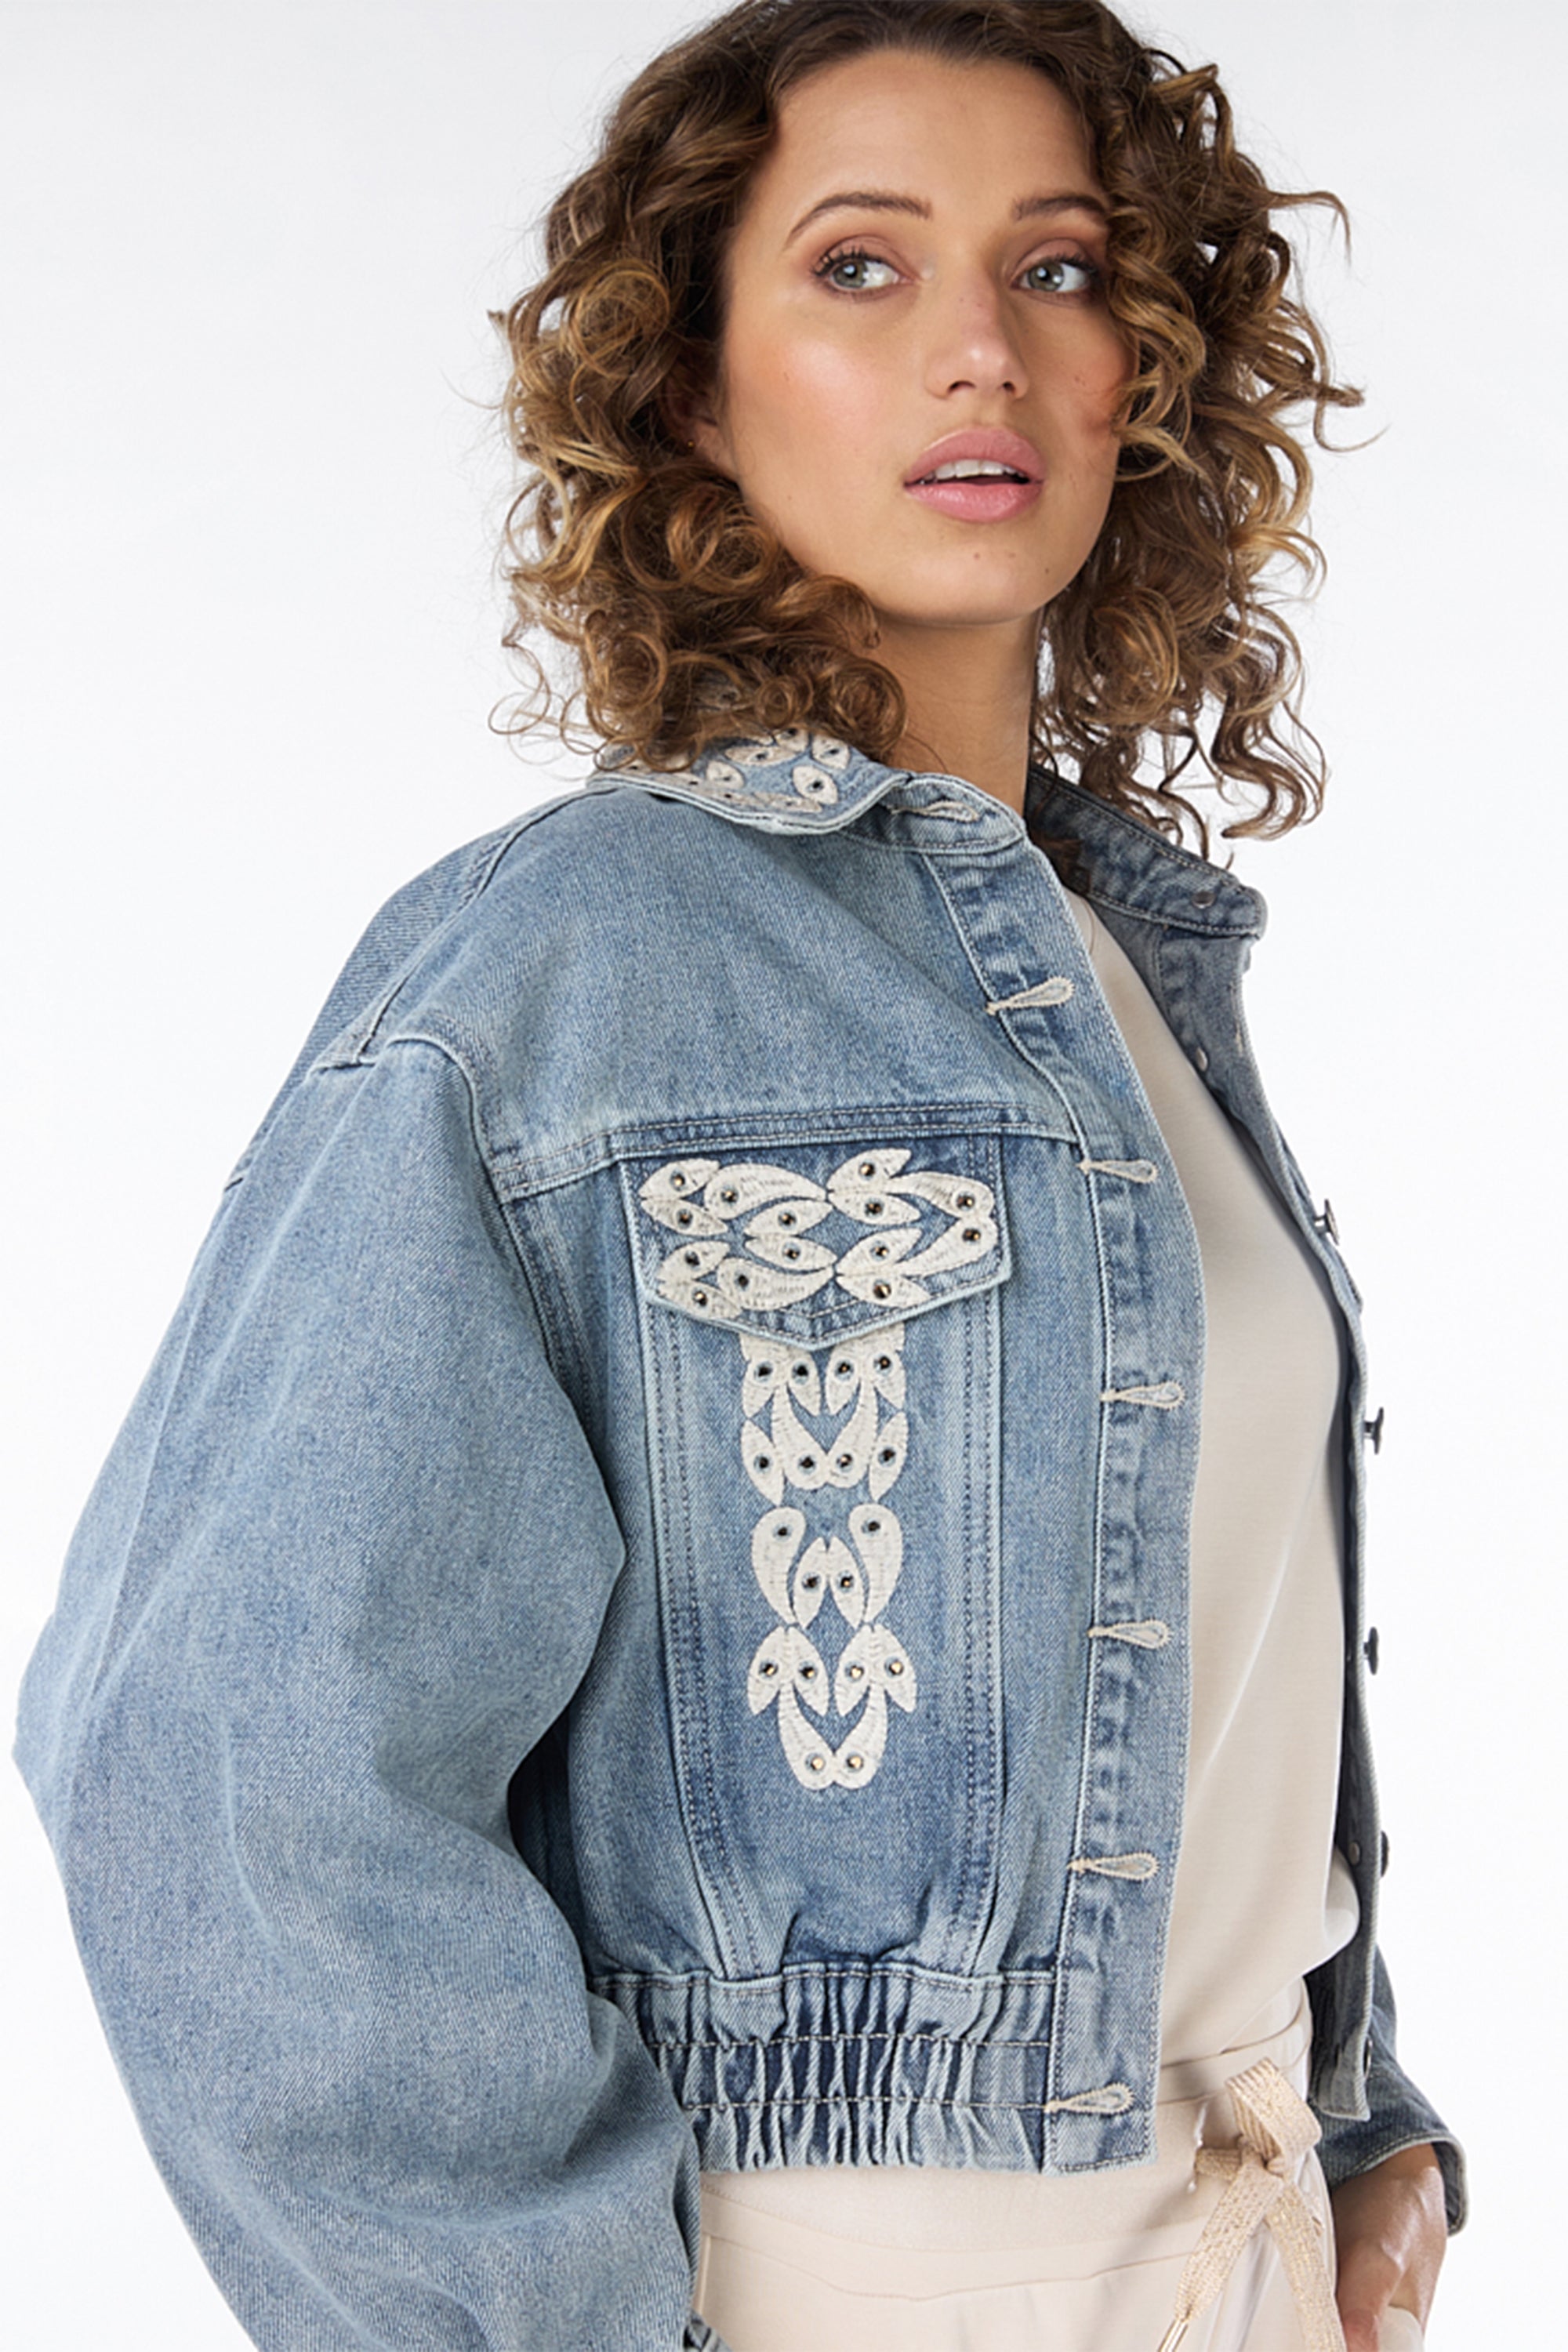 Esqualo (SP2412002) Women's Long Sleeve Cropped Blue Jean Jacket With Embroidery & Rhinestones on Collar and Front Panels